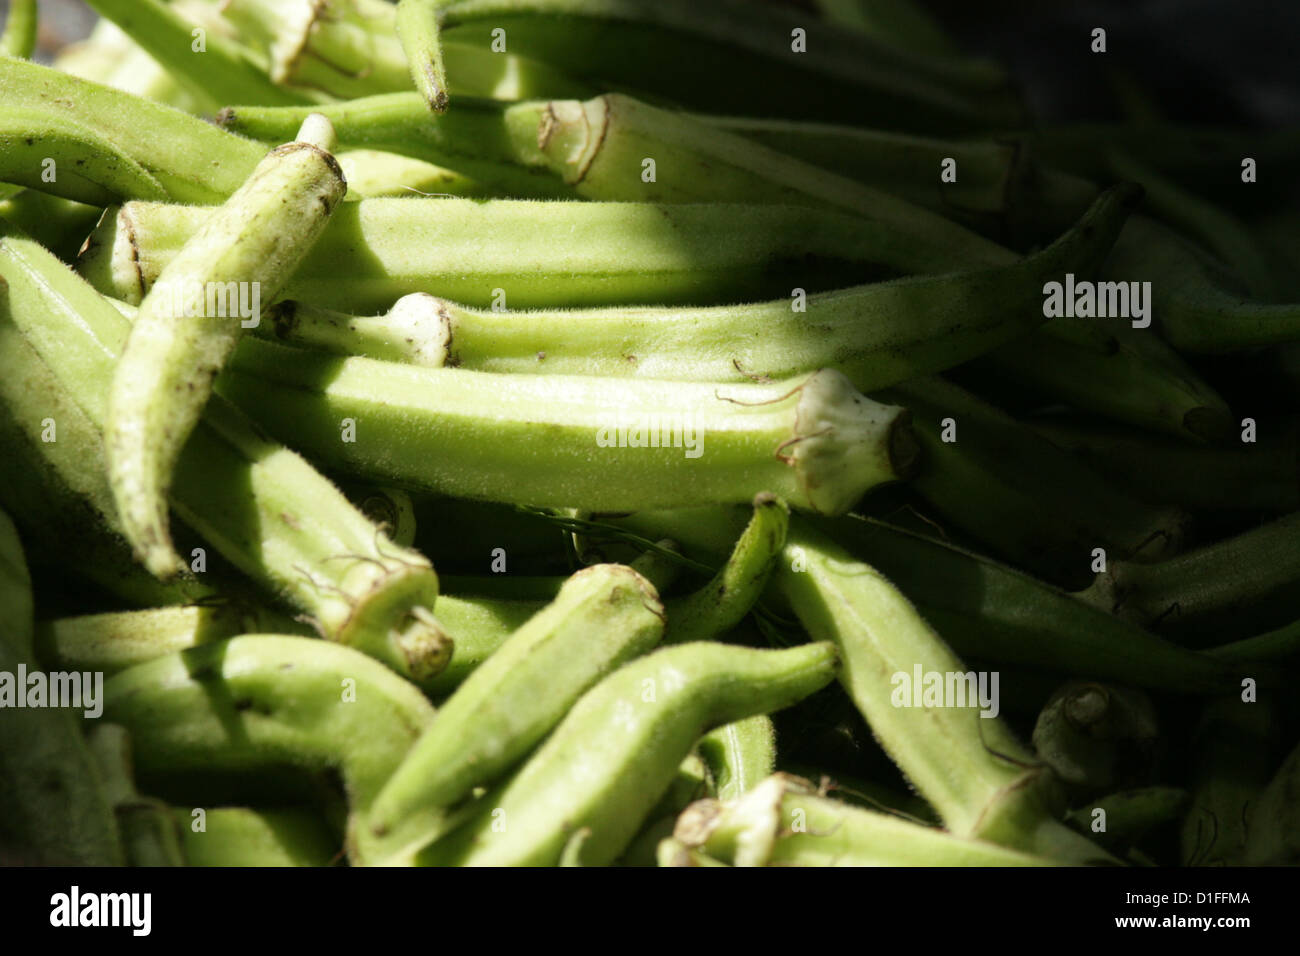 lalo, mauritian like eating this vegetables Stock Photo